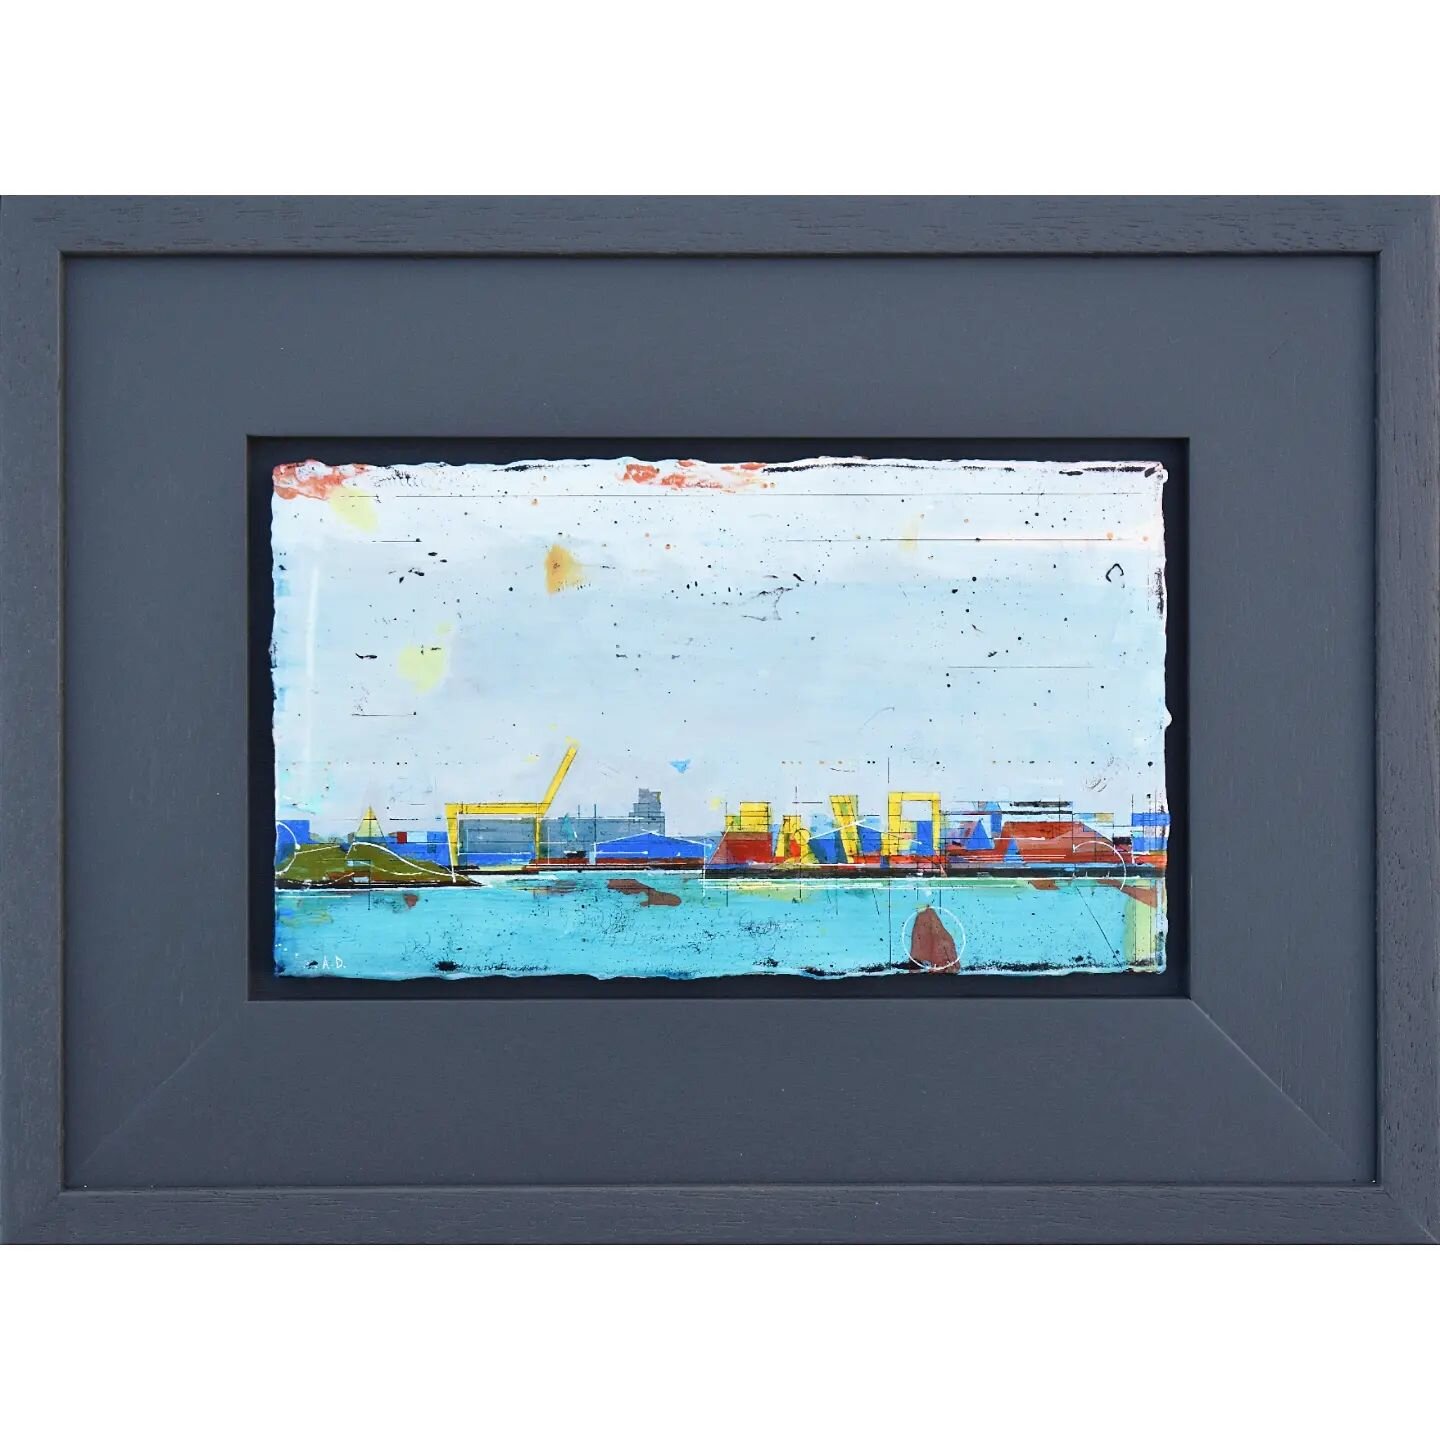 Photographing work for a studio sale of archive works on my website next week. The page will be live on Tuesday 1 December at 6pm. 

Leith Docks
Jesmonite and pigment on board with inscribed lines
In artist frame
Framed size 33 x 25cms
.
.
.
.
.
.
.
